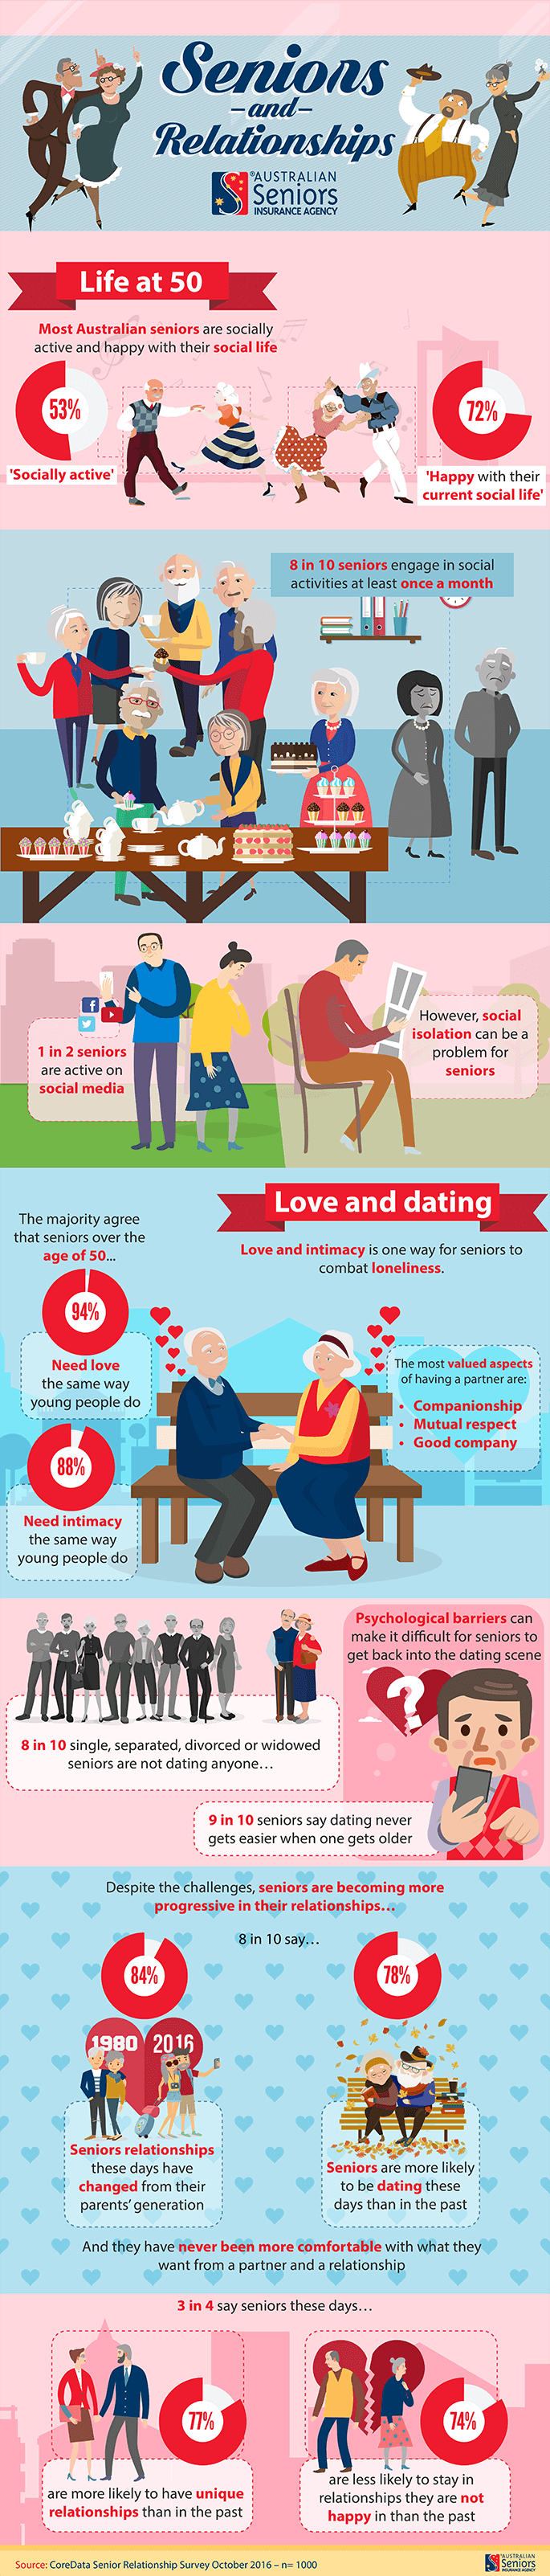 Over 50 and Single? You are not alone!